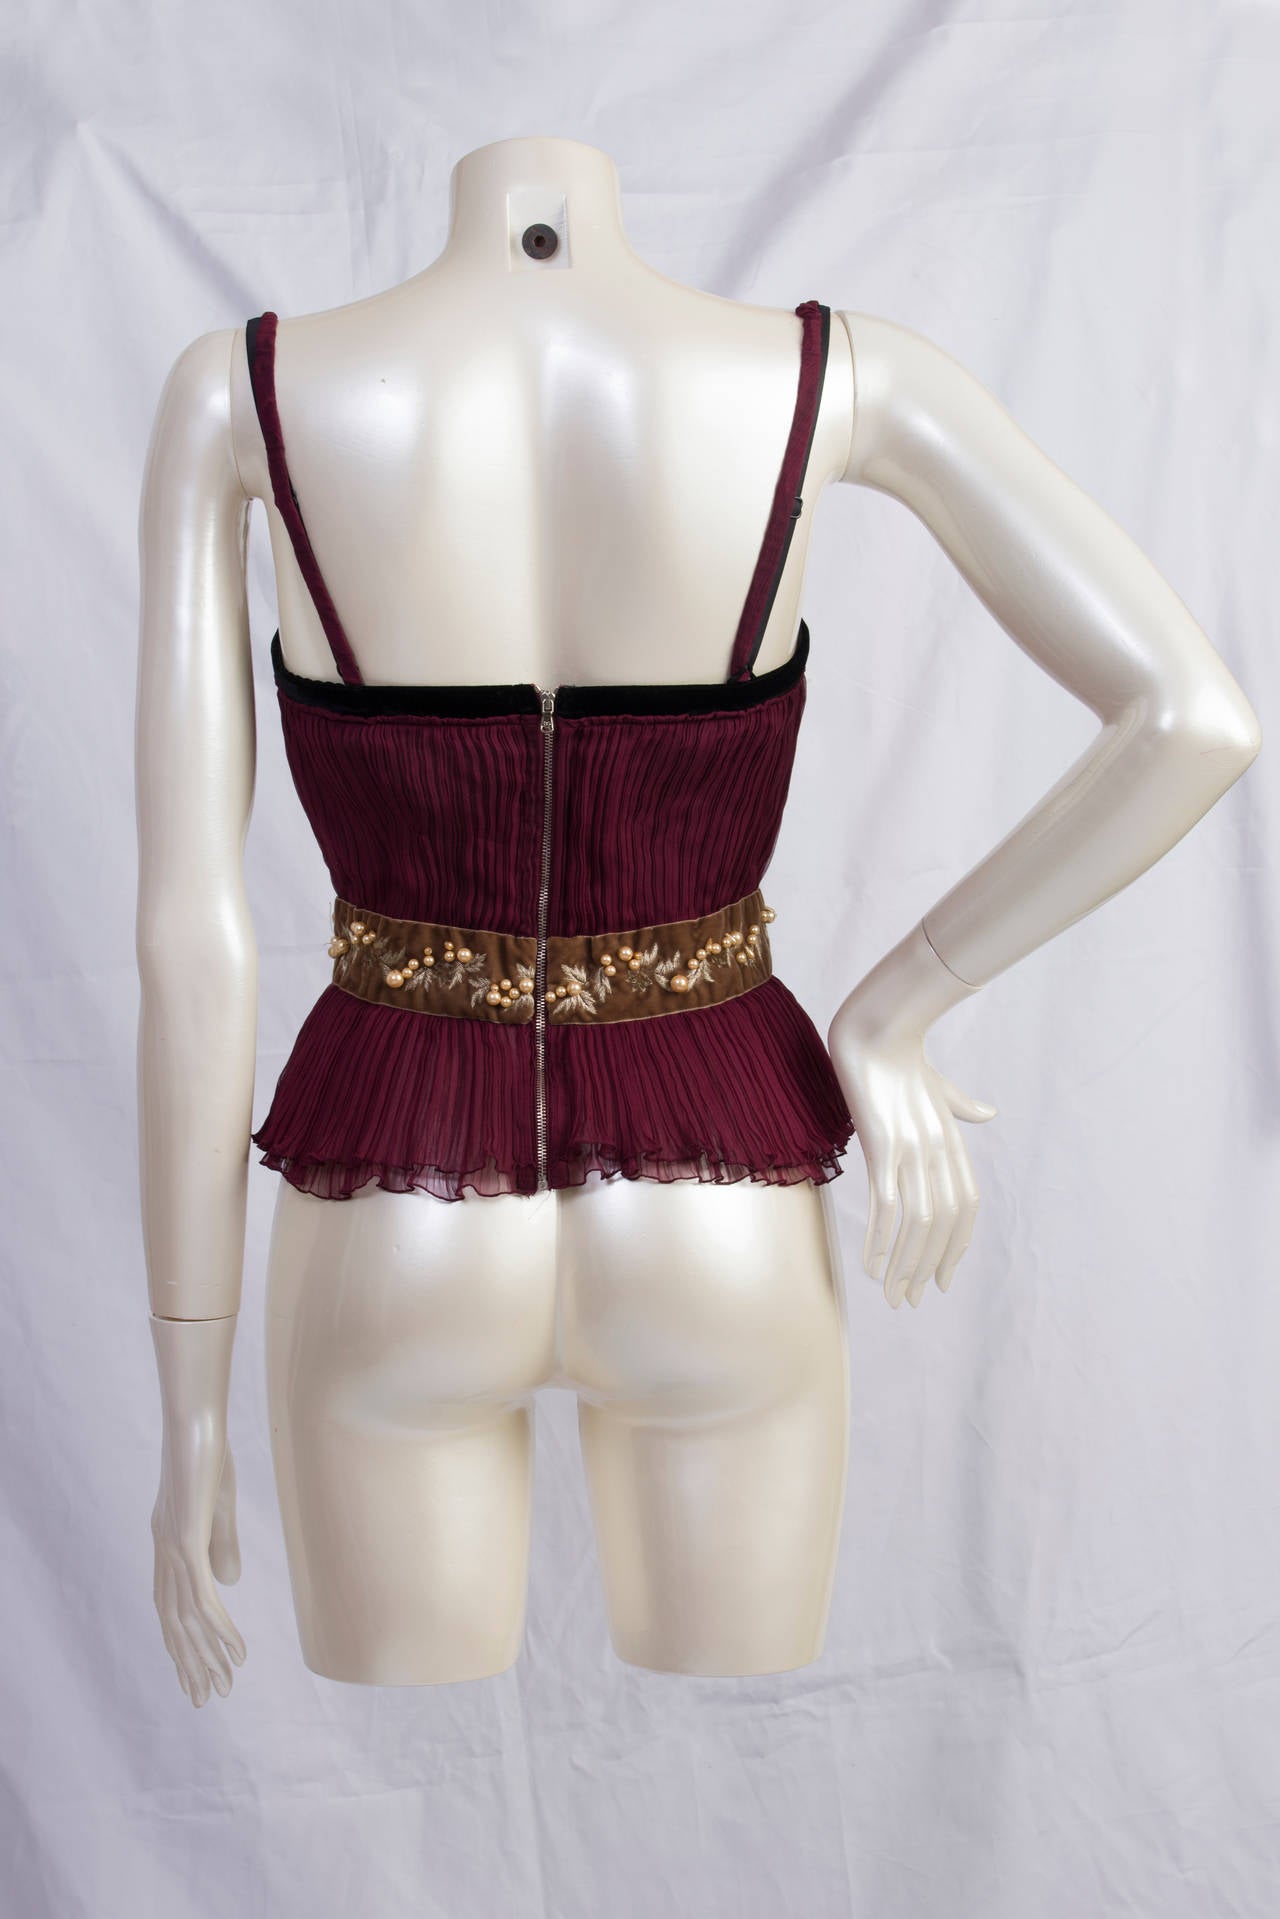 2000s Dolce & Gabbana Corset still with tags.